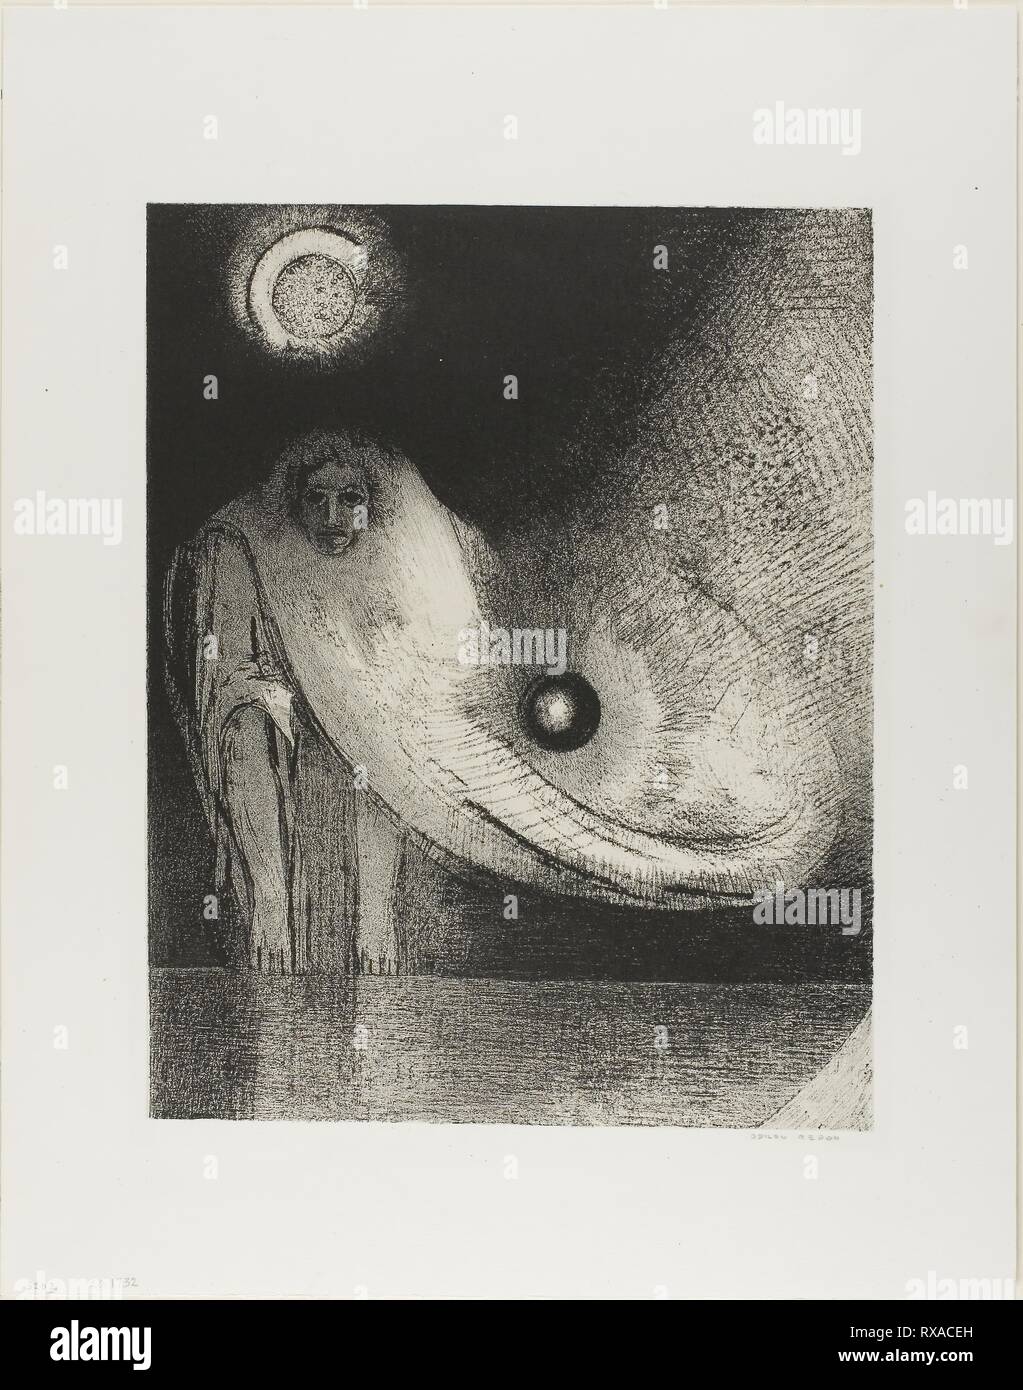 The Buddha. Odilon Redon; French, 1840-1916. Date: 1895. Dimensions: 315 × 250 mm (image); 330 × 261 mm (stone); 441 × 348 mm (sheet). Lithograph in black on cream China paper laid down on ivory wove paper. Origin: France. Museum: The Chicago Art Institute. Stock Photo